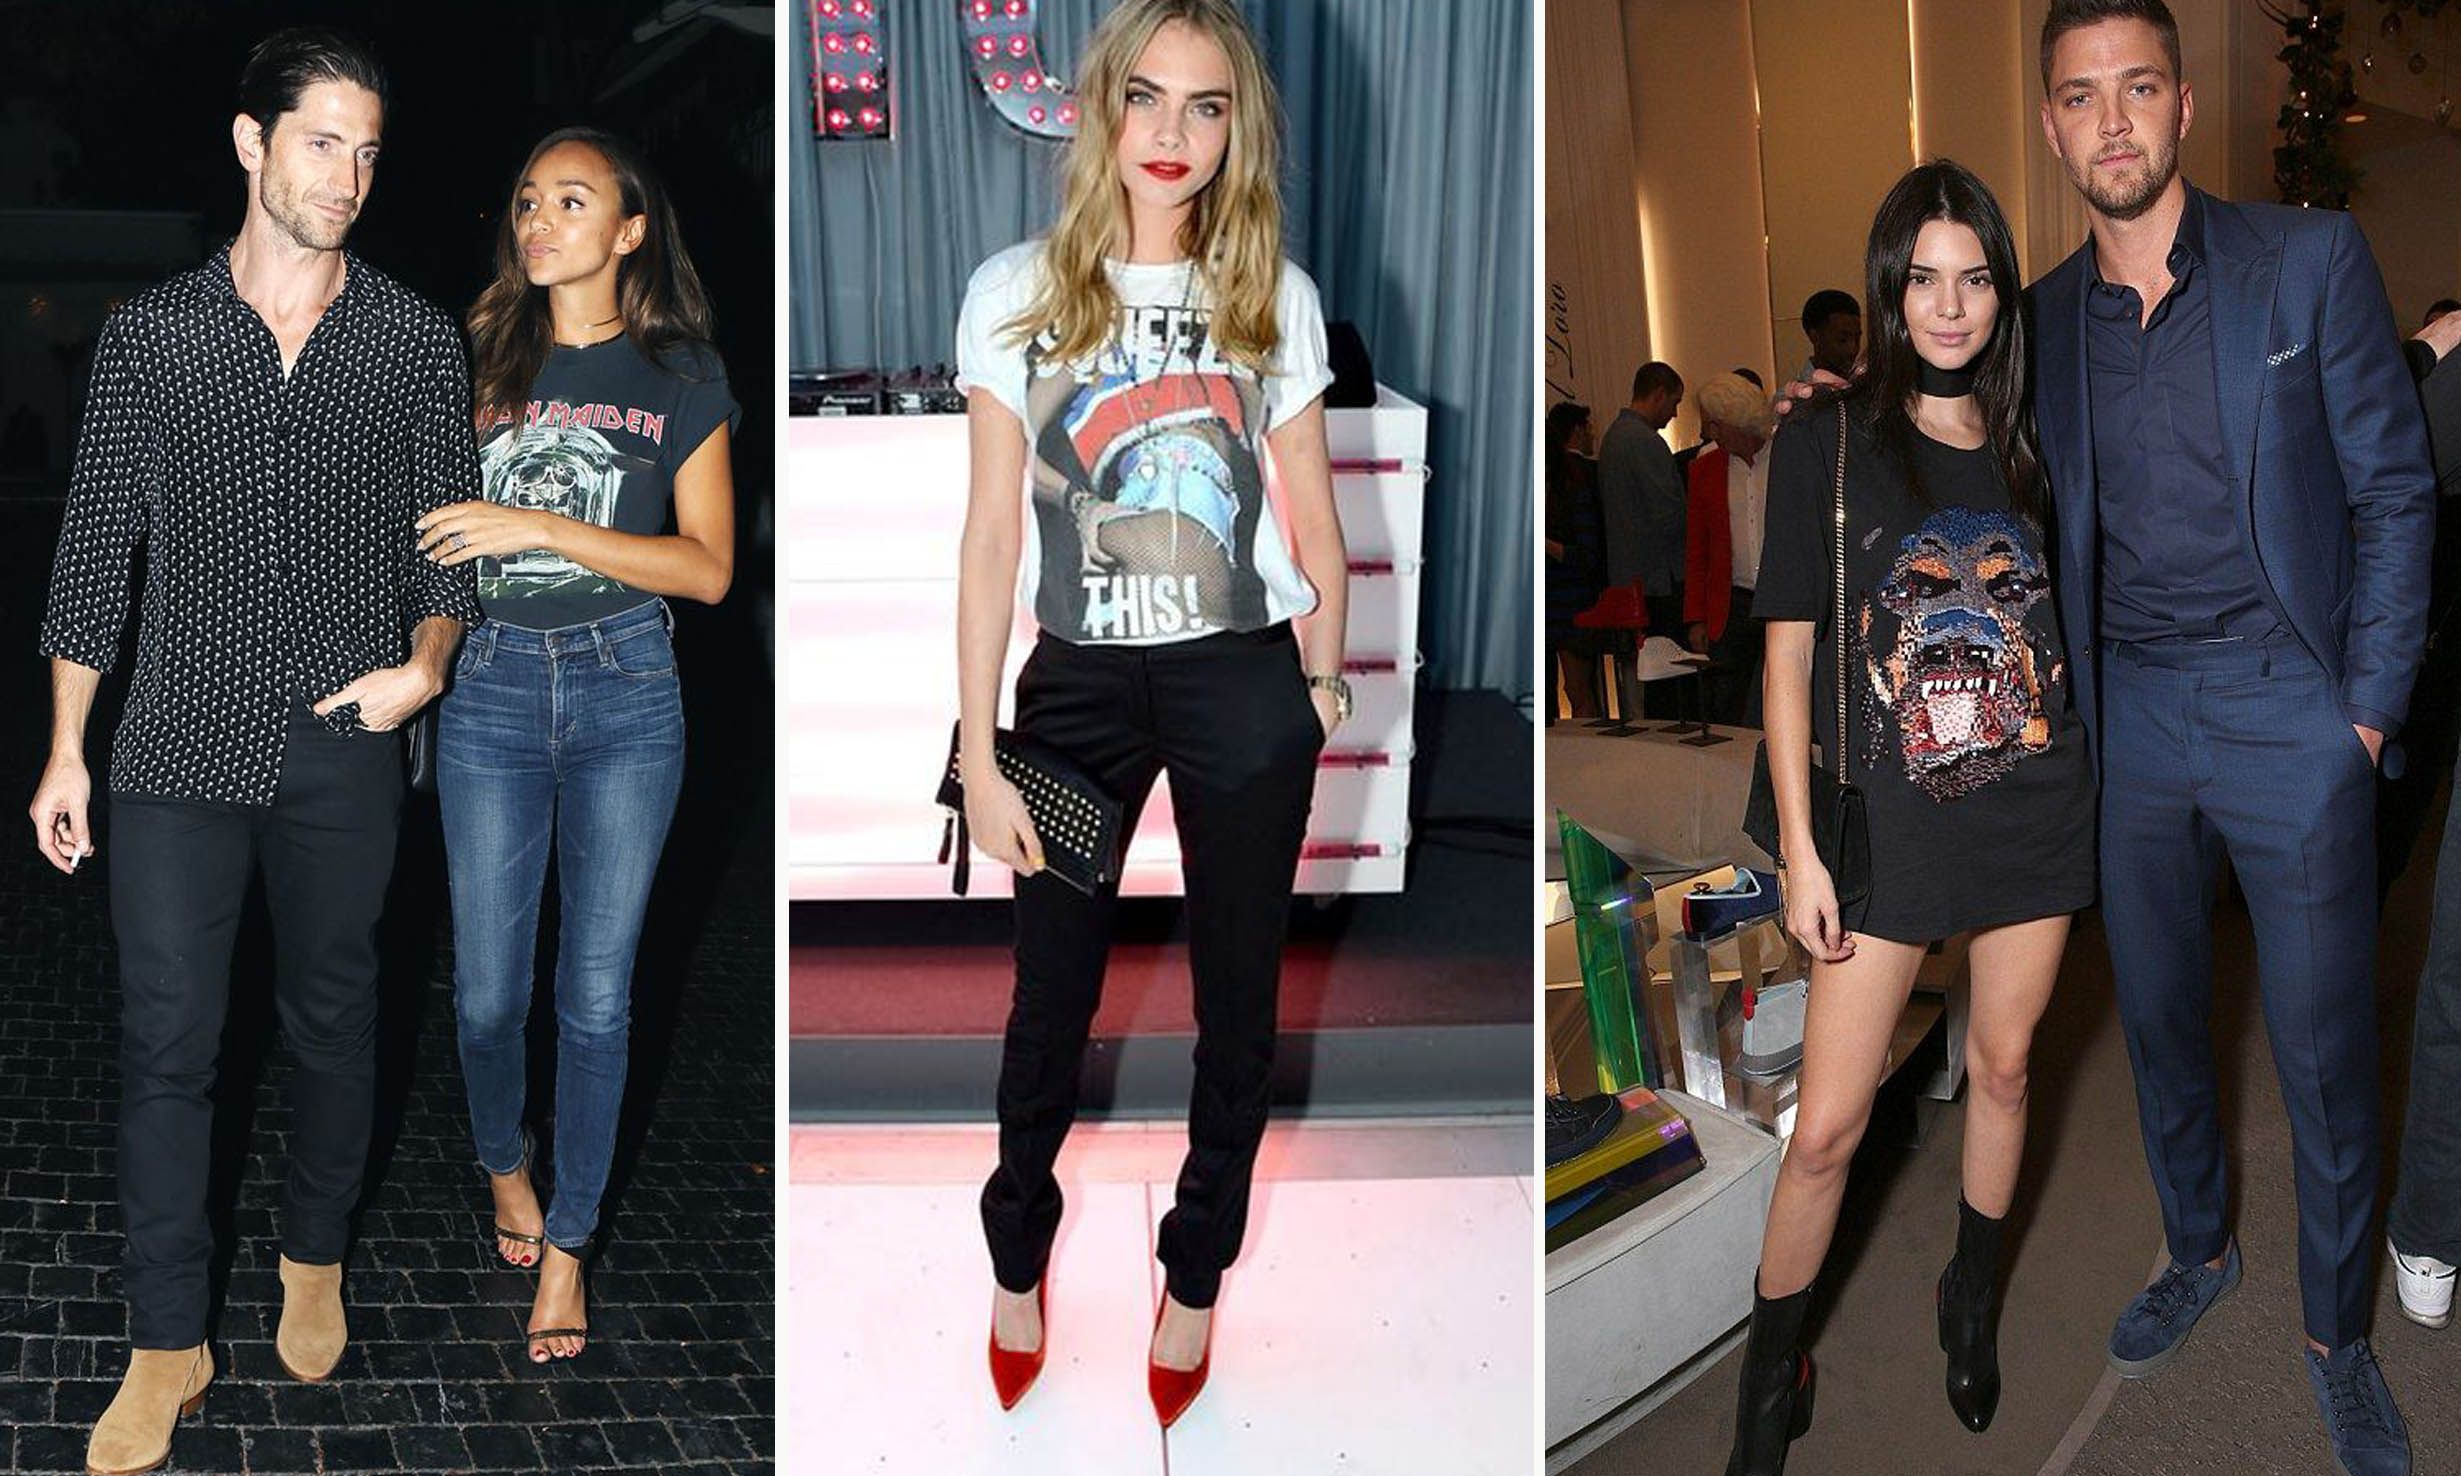 Trending: Graphic T-Shirt, a Style Popularized by Many World Celebrities